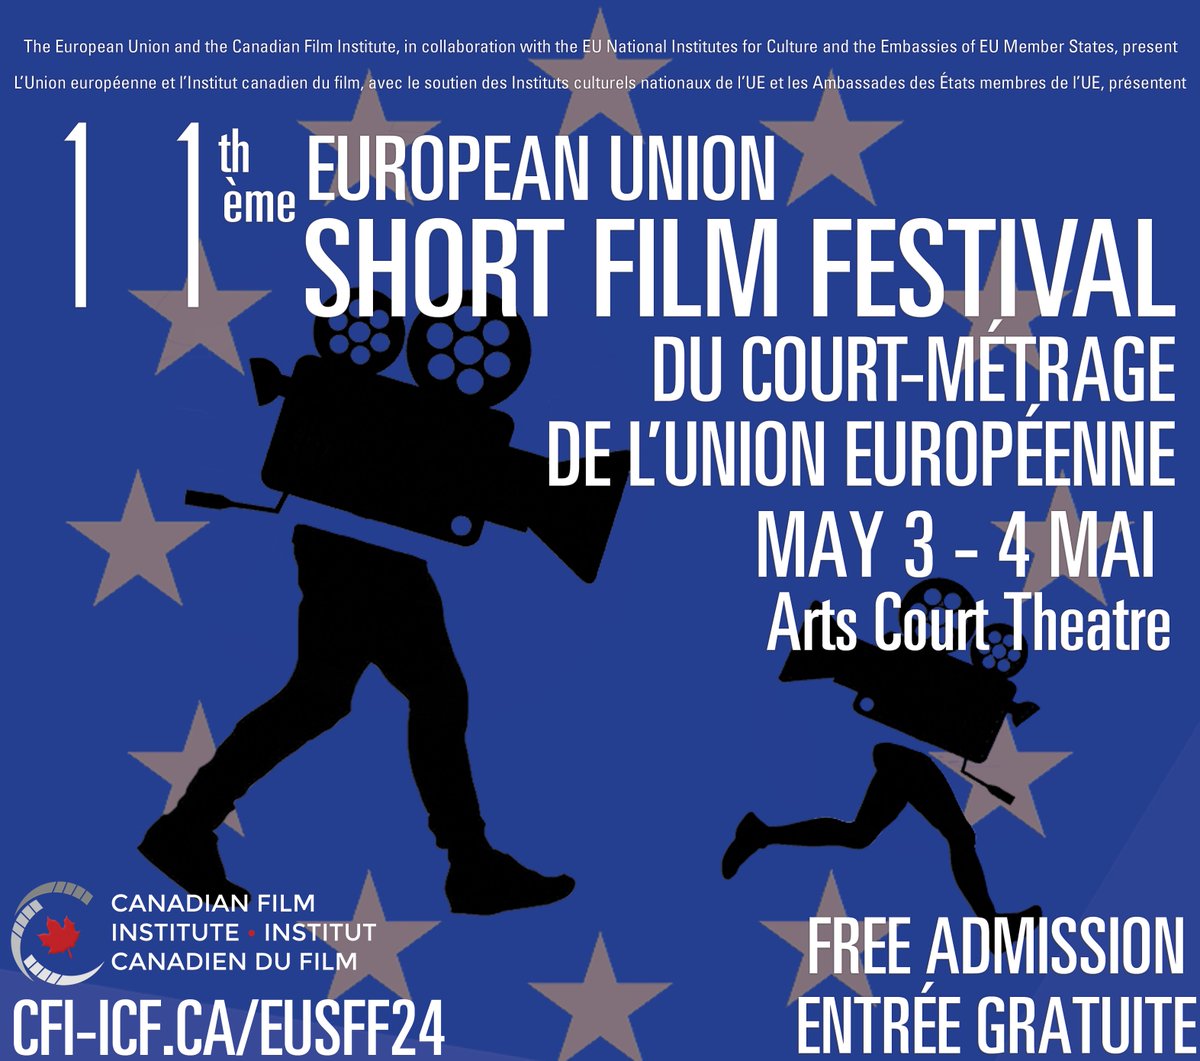 🎥🍿Hey, movie lovers: the EU Short Film Festival is back for an 11th edition! With short films from 22 EU countries, the #EUSFF promises a little something for everyone. 📅 May 3-4 📍 Ottawa Learn more: bit.ly/3WeWZzA